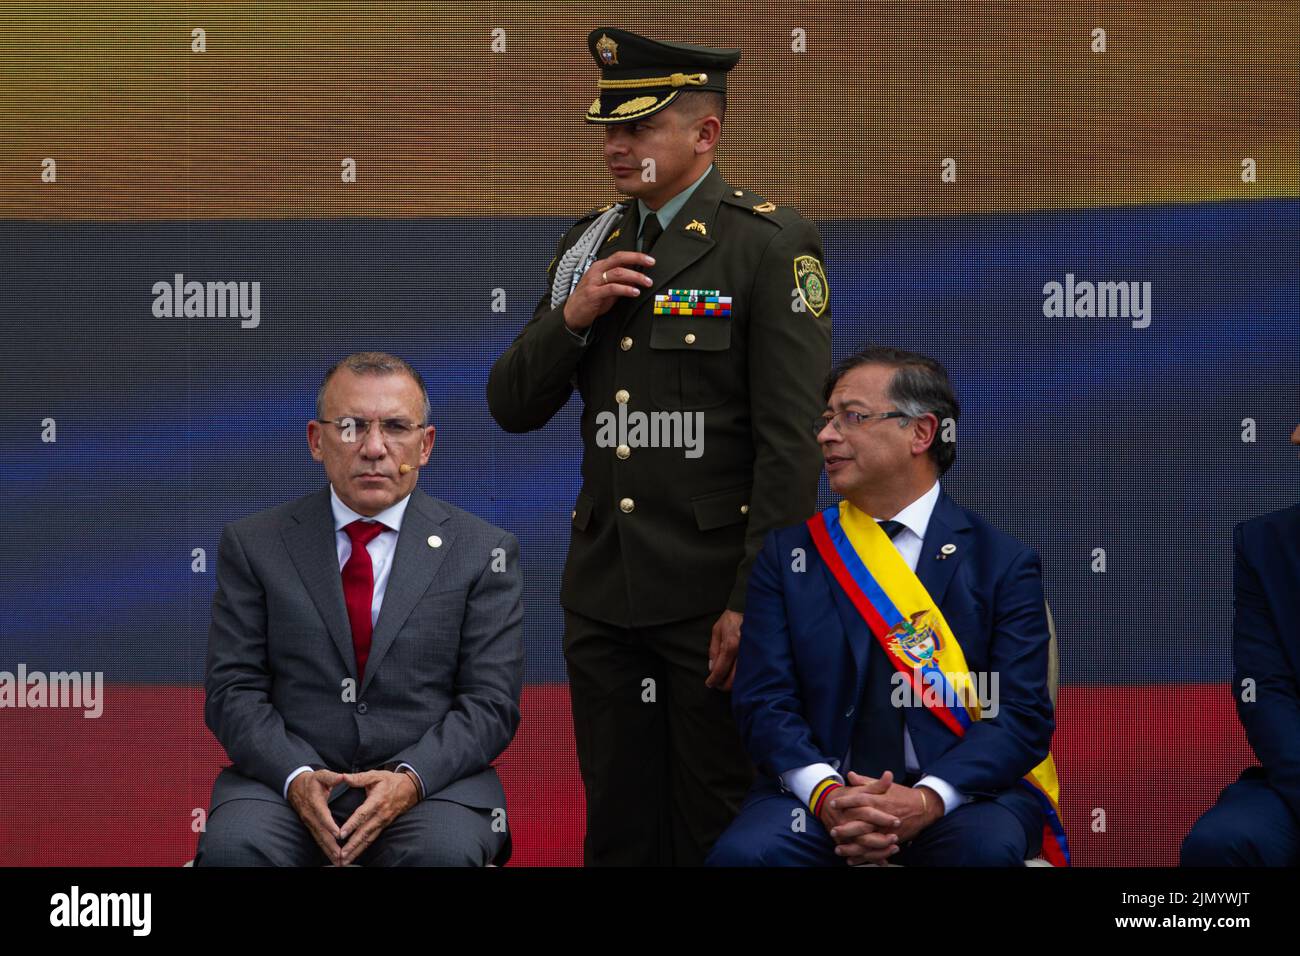 Colombia's Senate president Roy Barreras (Left) and president Gustavo Petro (right) during the inauguration event of Colombia's first left-wing presid Stock Photo